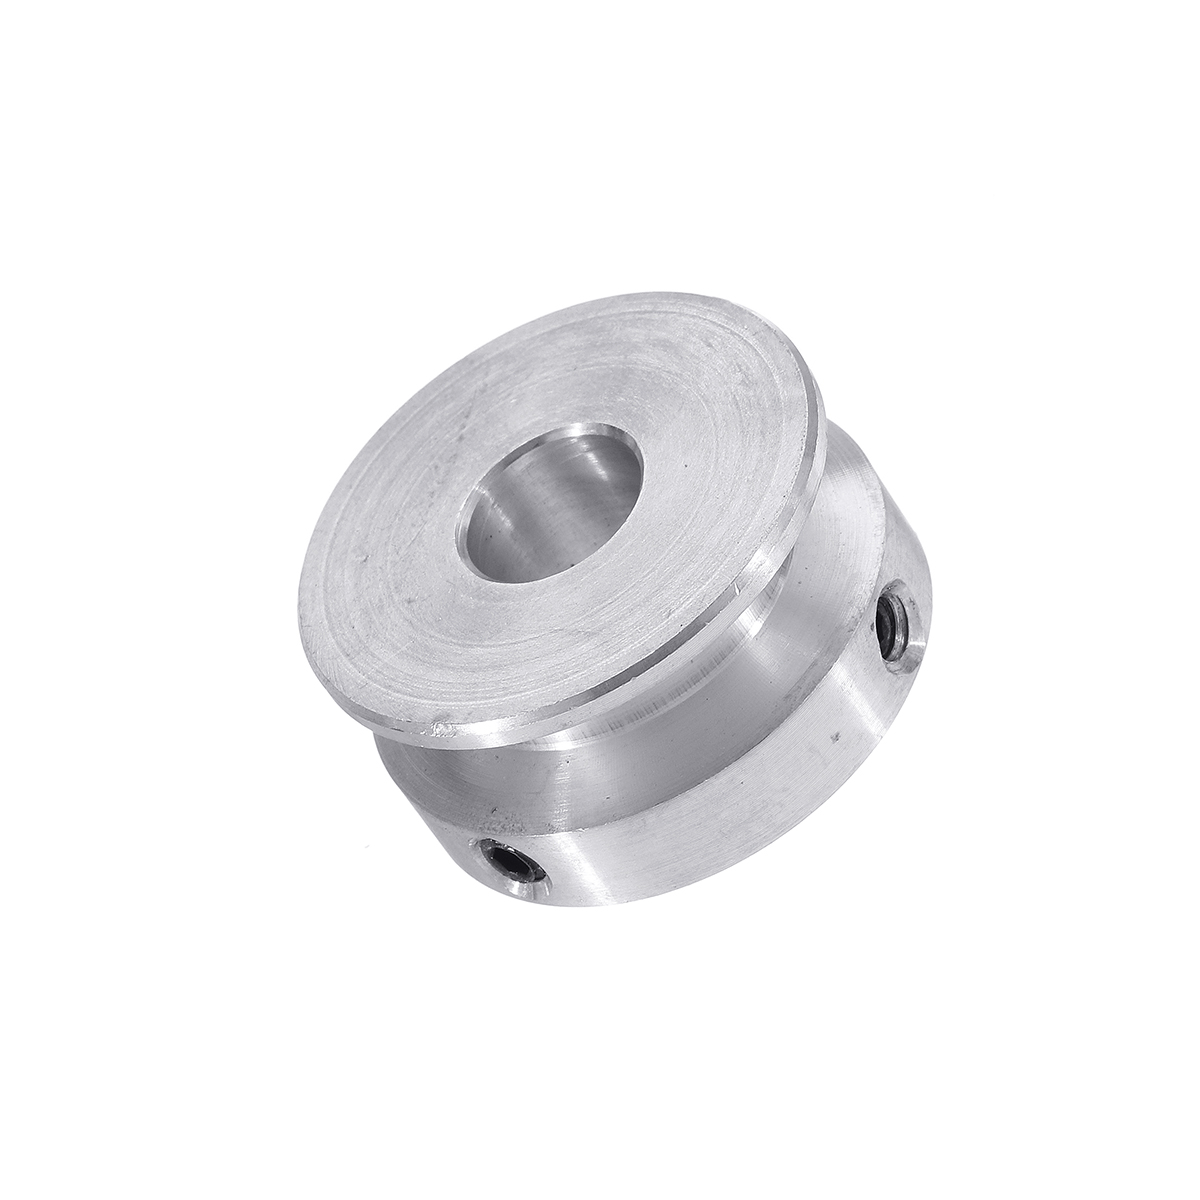 30MM-Single-Groove-Pulley-4-16MM-Fixed-Bore-Pulley-Wheel-for-Motor-Shaft-6MM-Belt-1561882-2